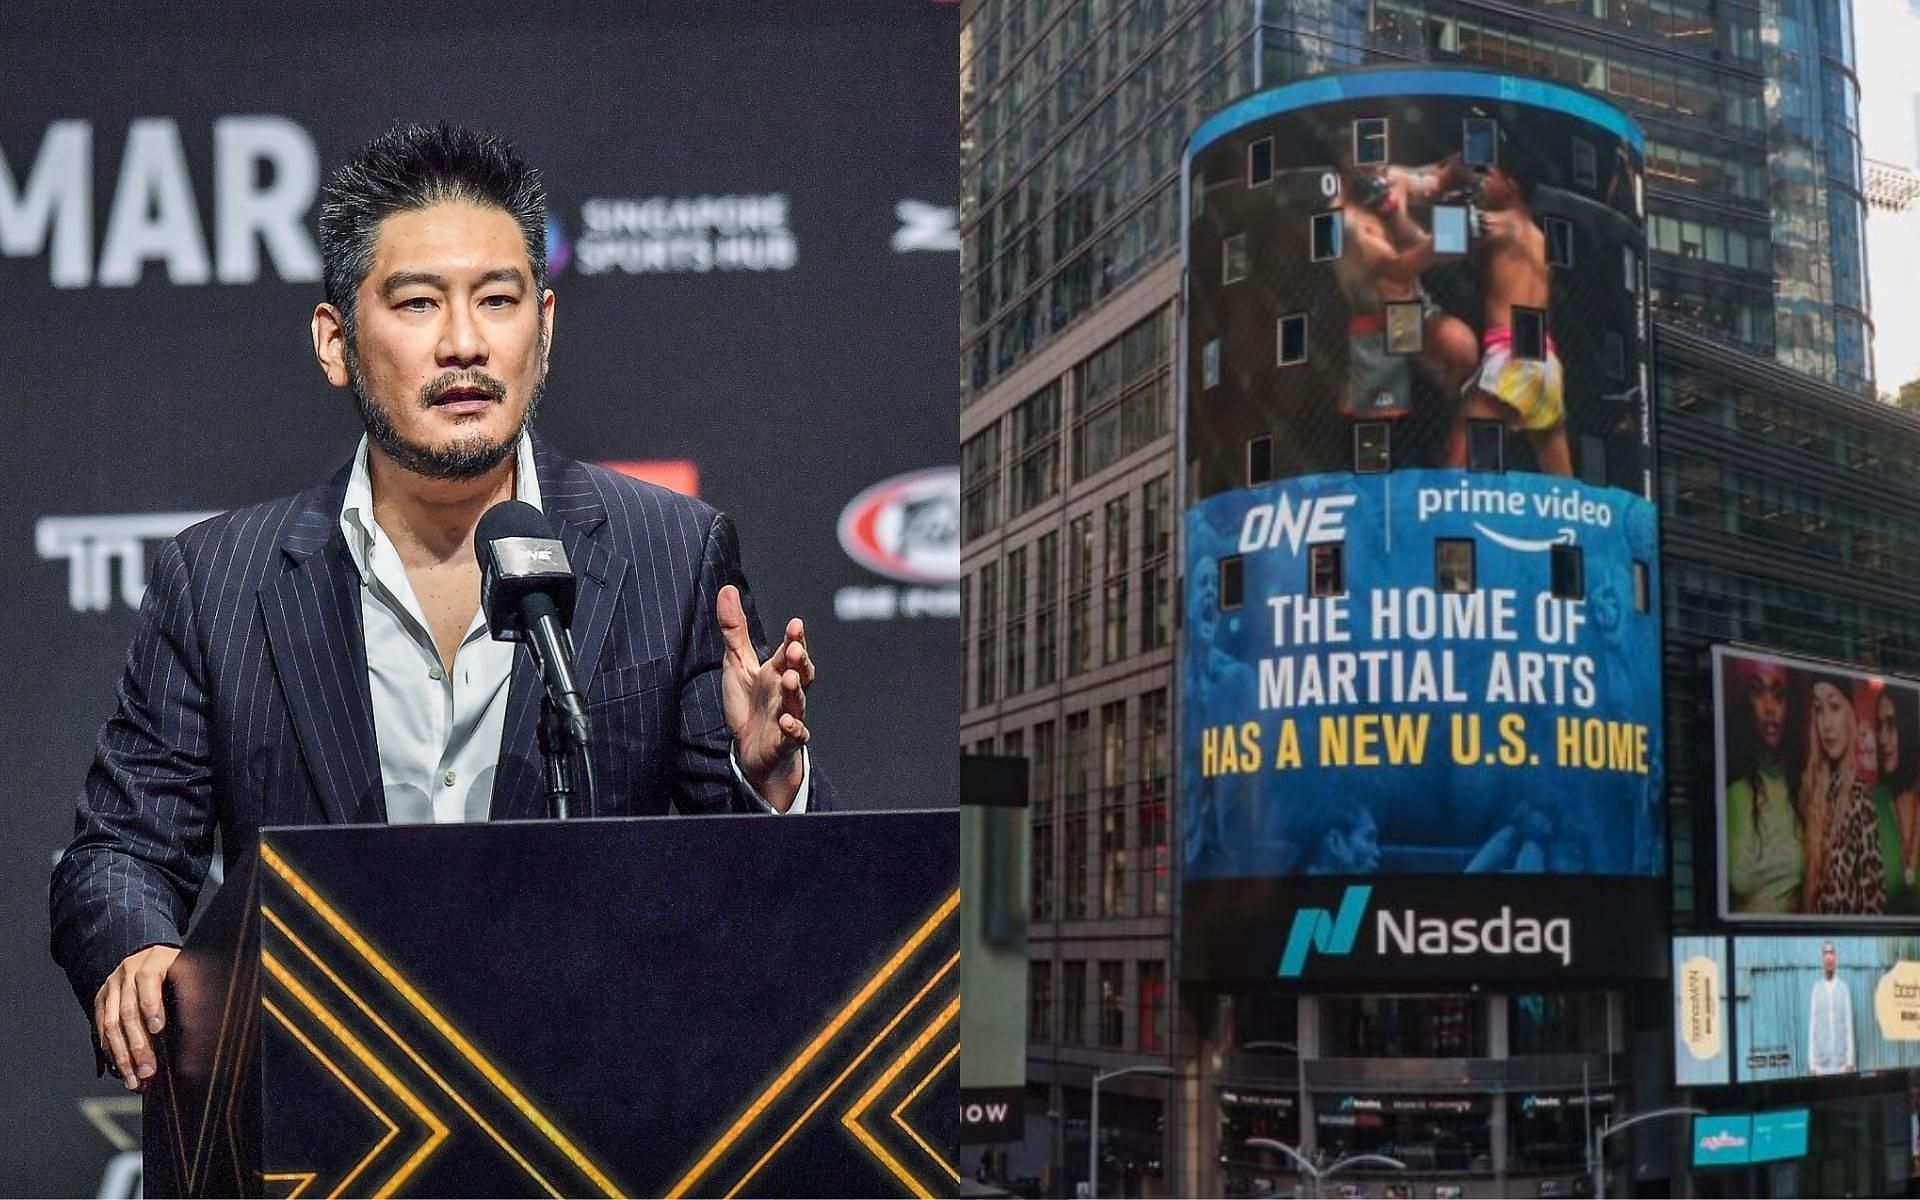 ONE and its CEO Chatri Sityodtong (left) made a major 5-year deal with Amazon Prime Video. (Images courtesy of ONE Championship)